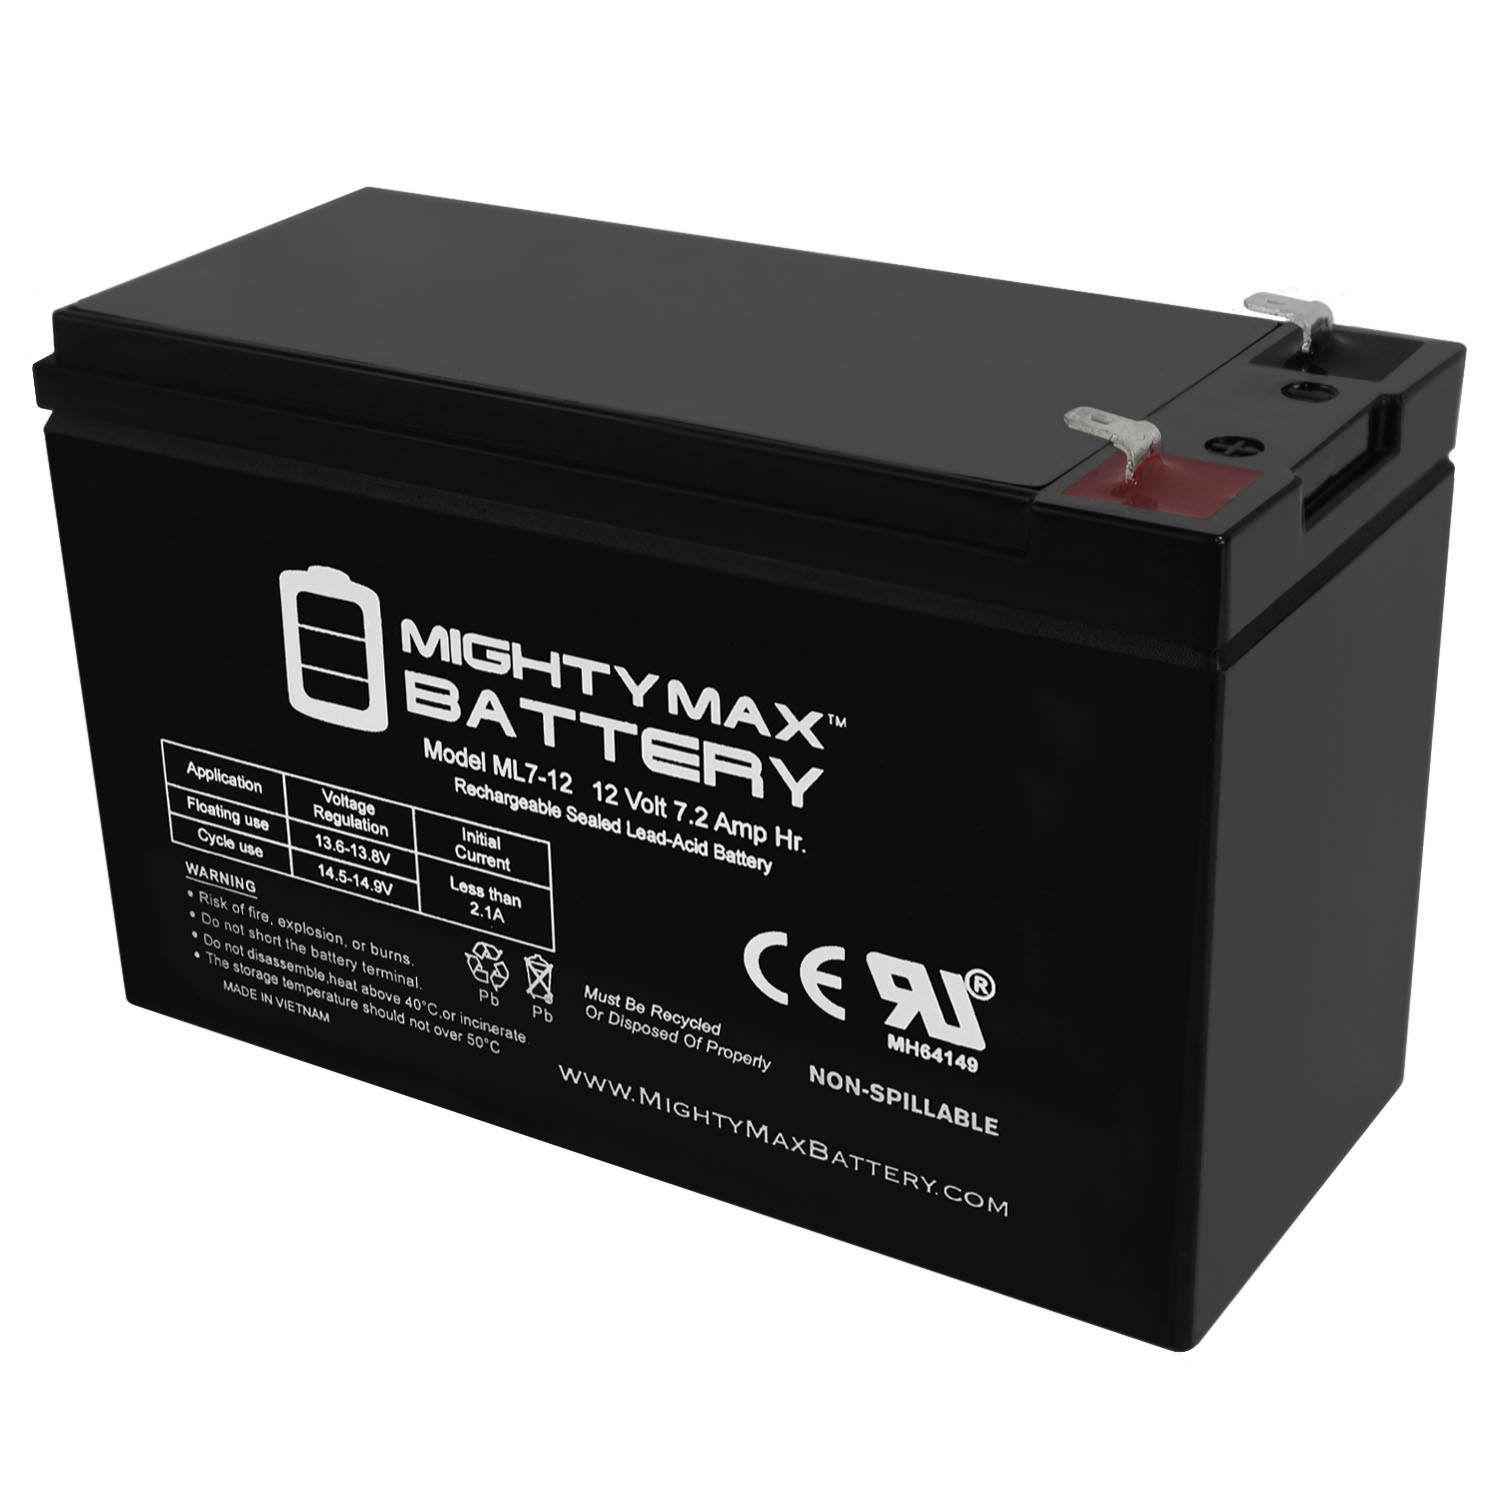 ML7-12 - 12V 7.2AH Replacement Battery for APC BES550R